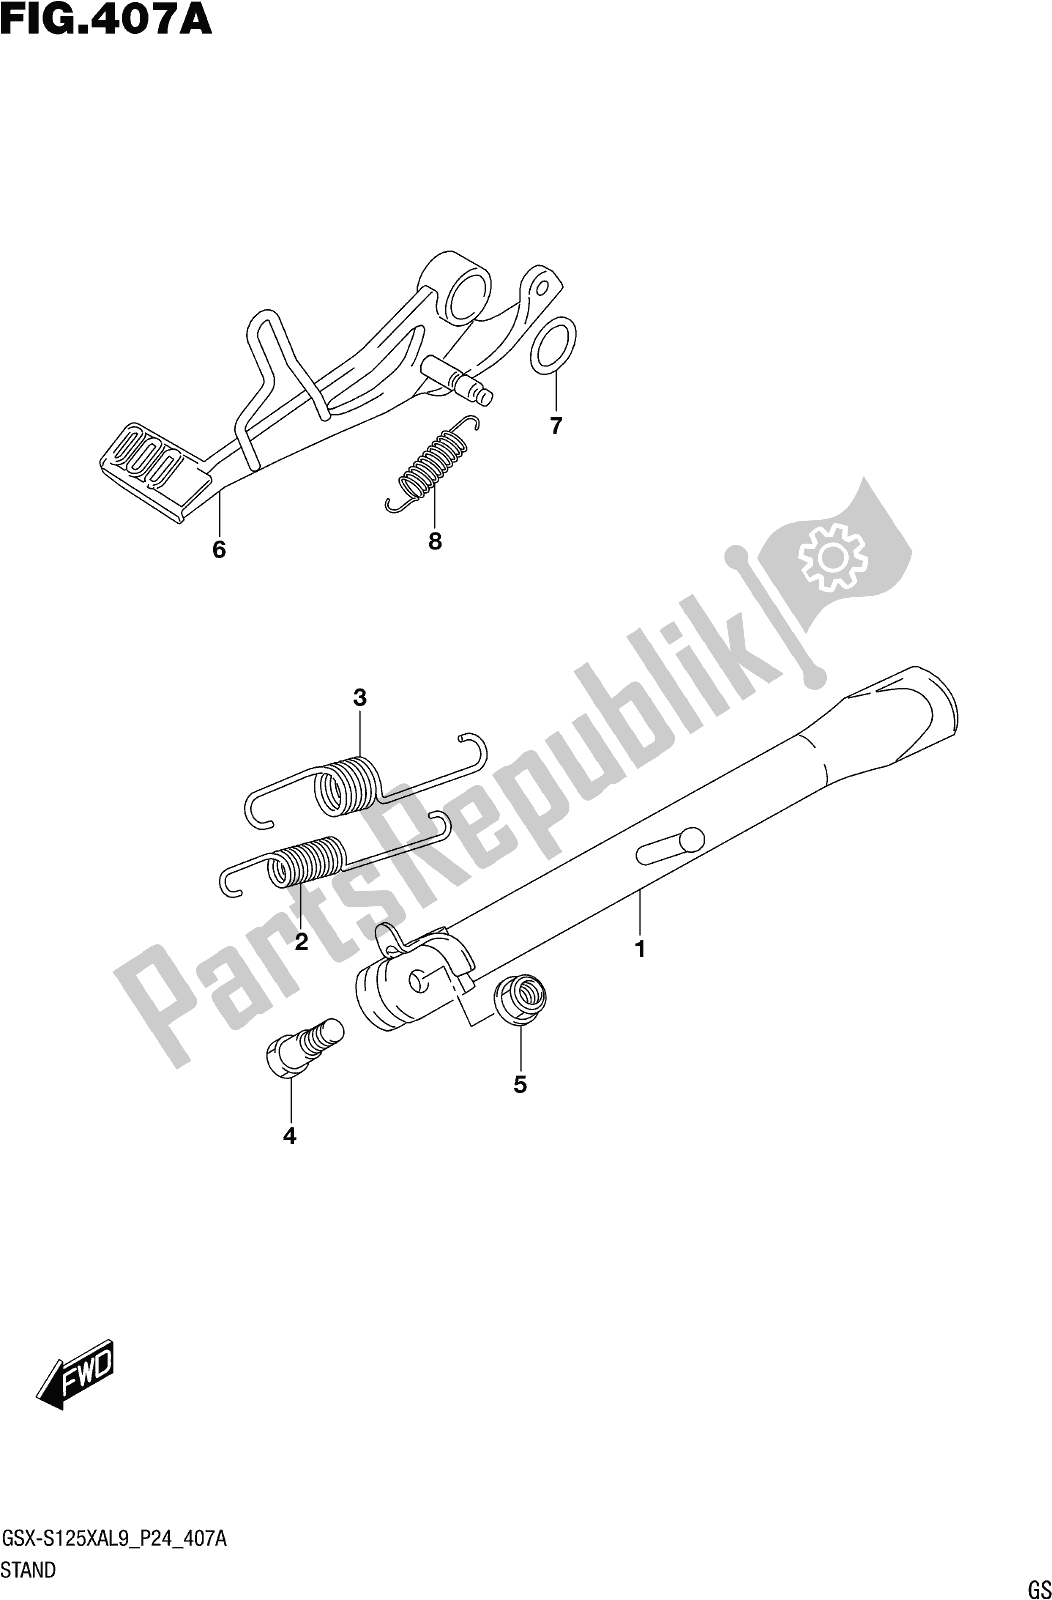 All parts for the Fig. 407a Stand of the Suzuki Gsx-s 125 XA 2019